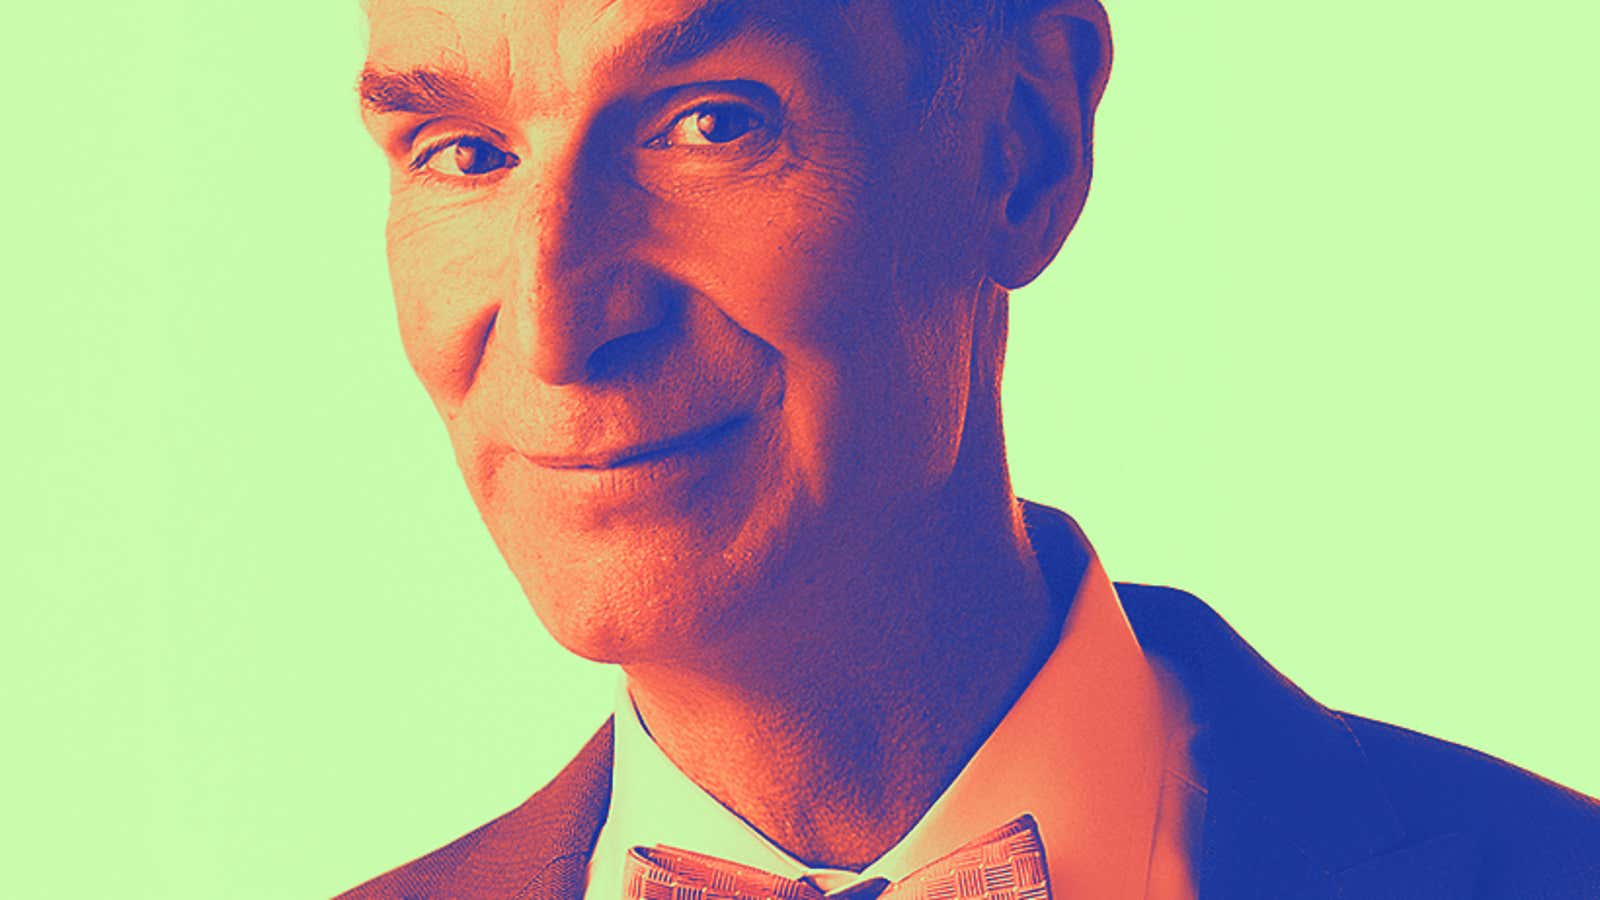 Bill Nye says our mask-wearing habit is here to stay